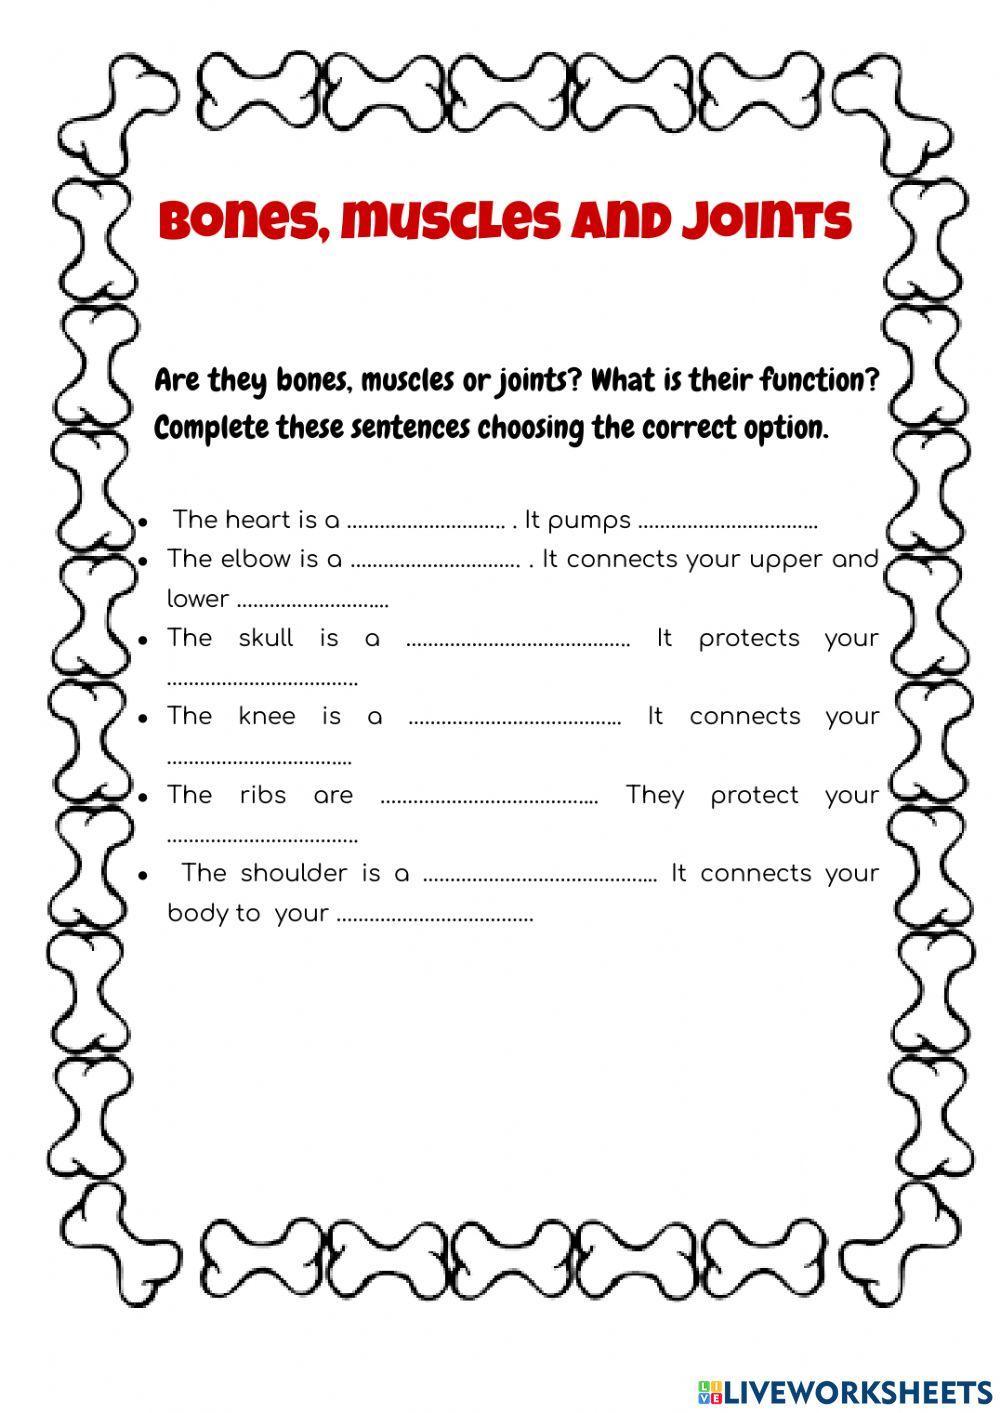 Bones, joints and muscles